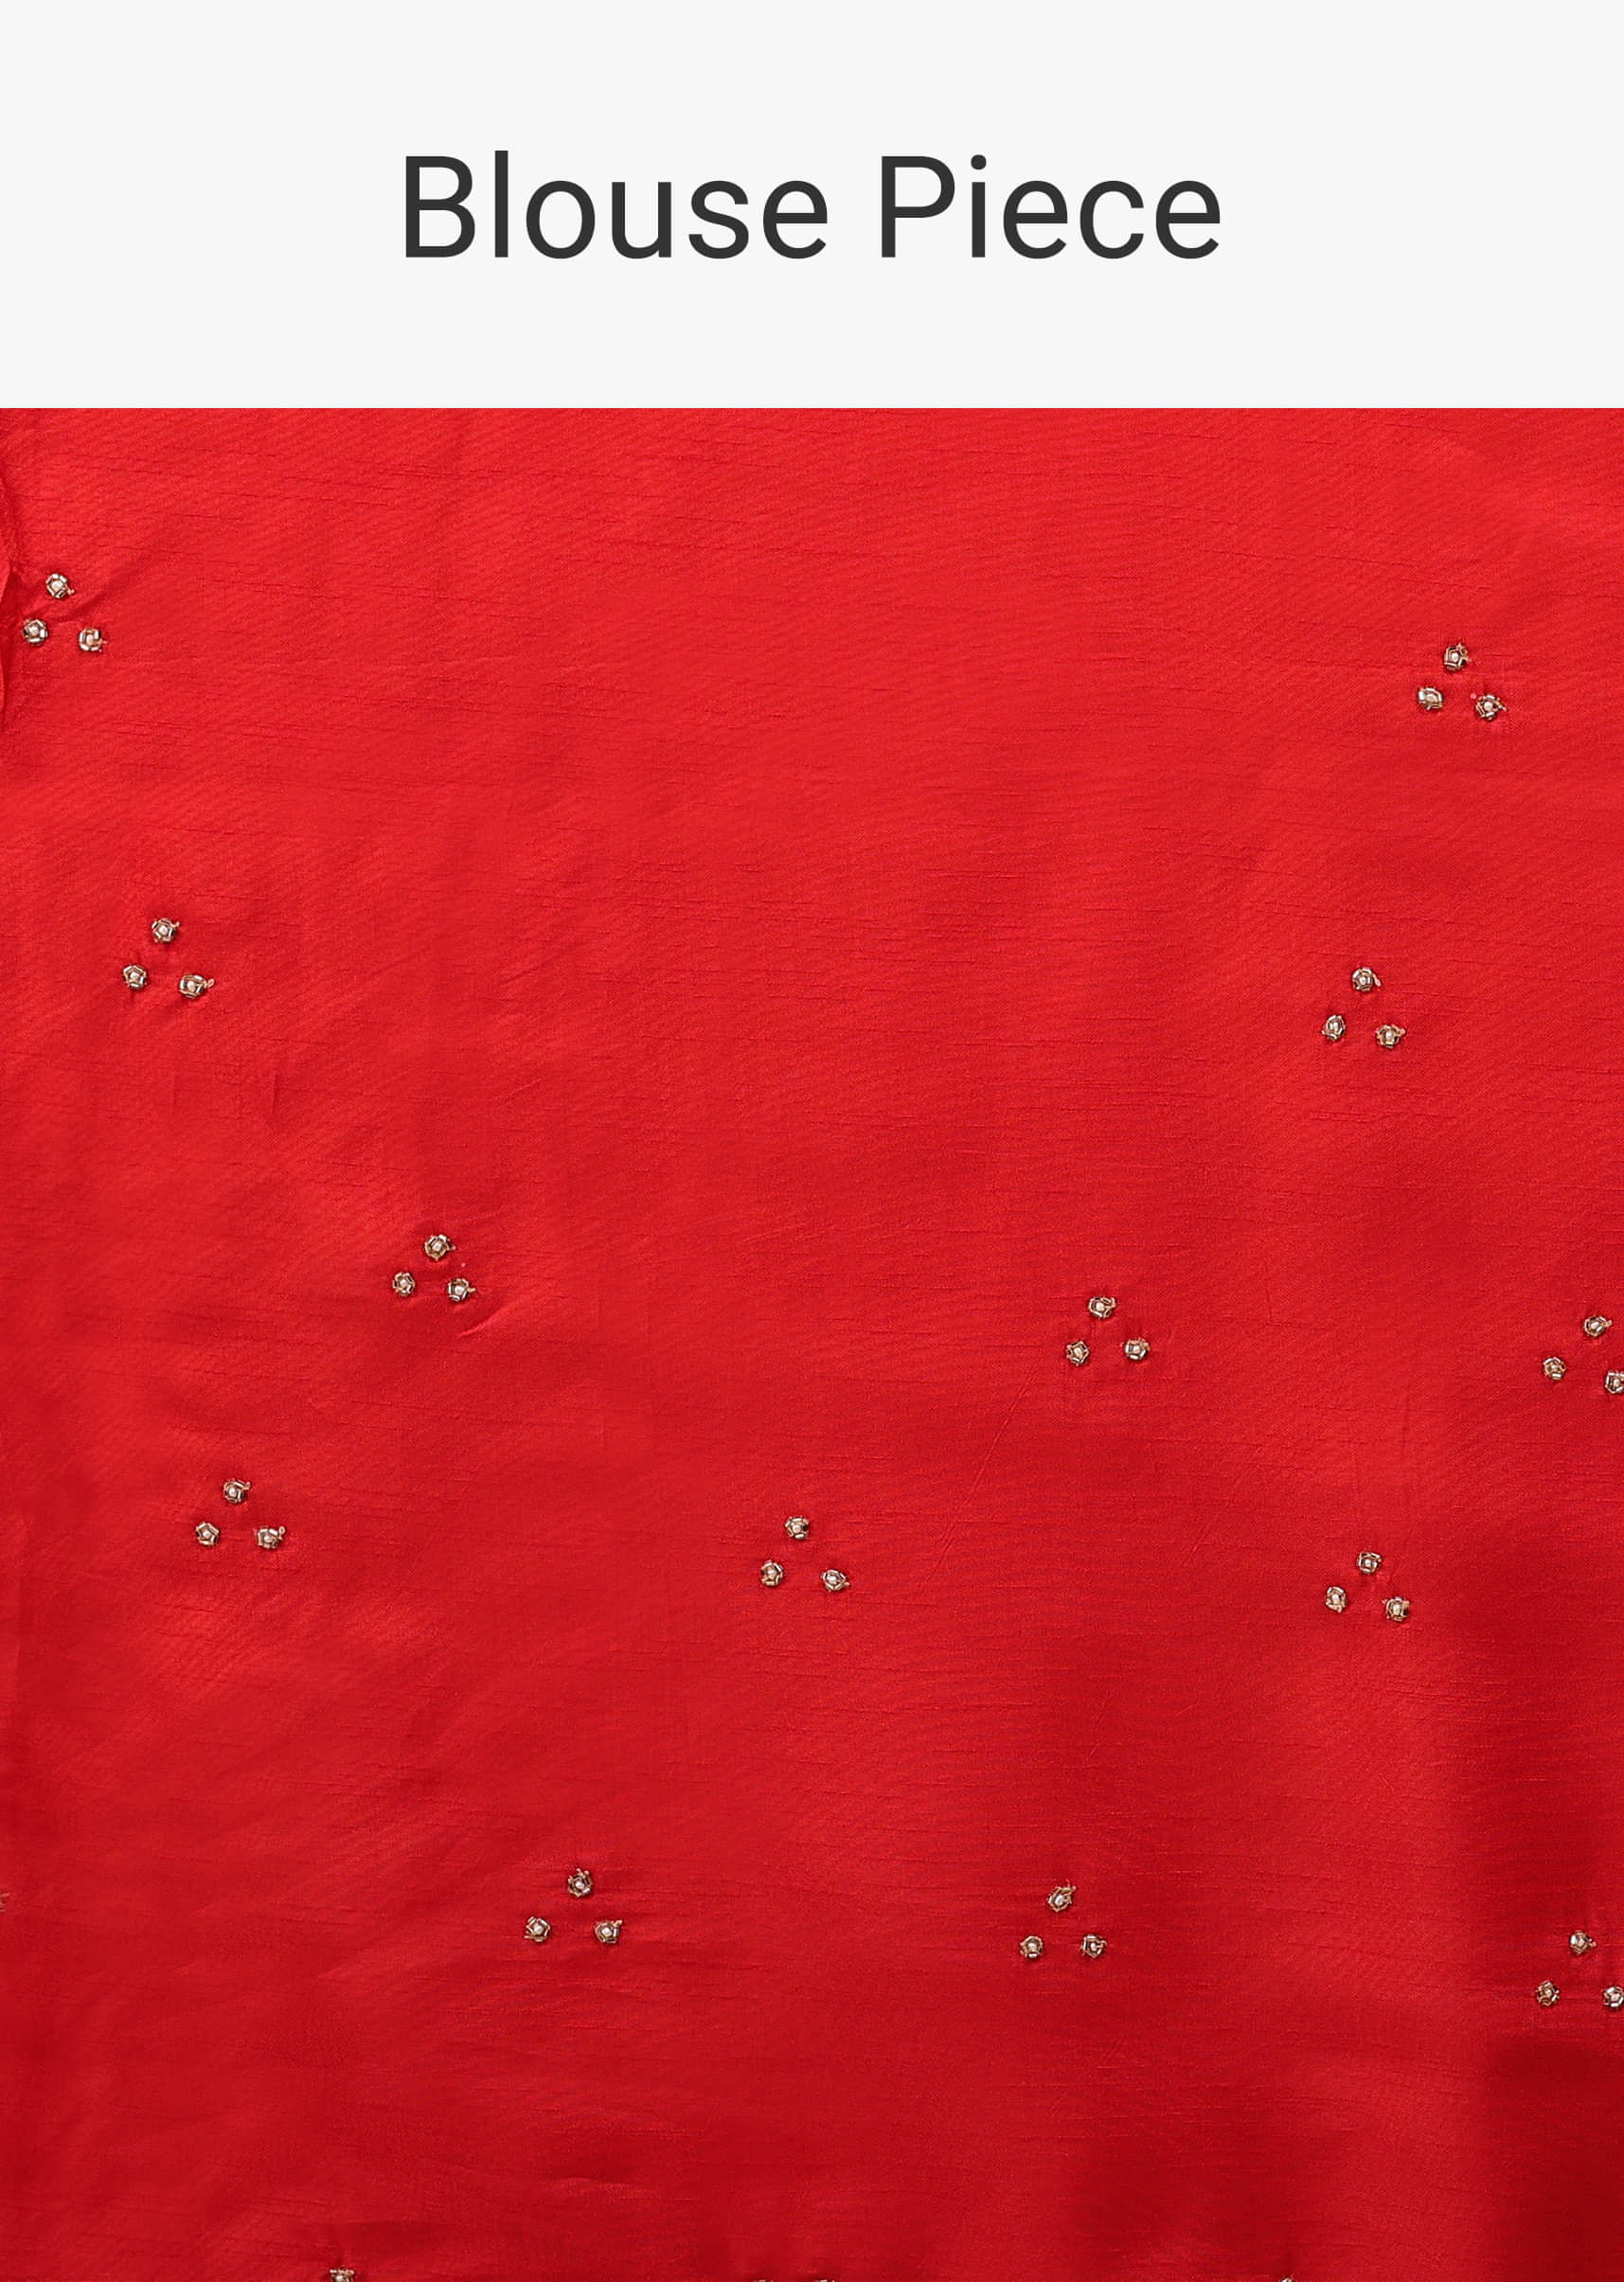 Poppy Red Organza Saree With Pink Resham Work, Cut Dana And Floral Embroidery Buttis